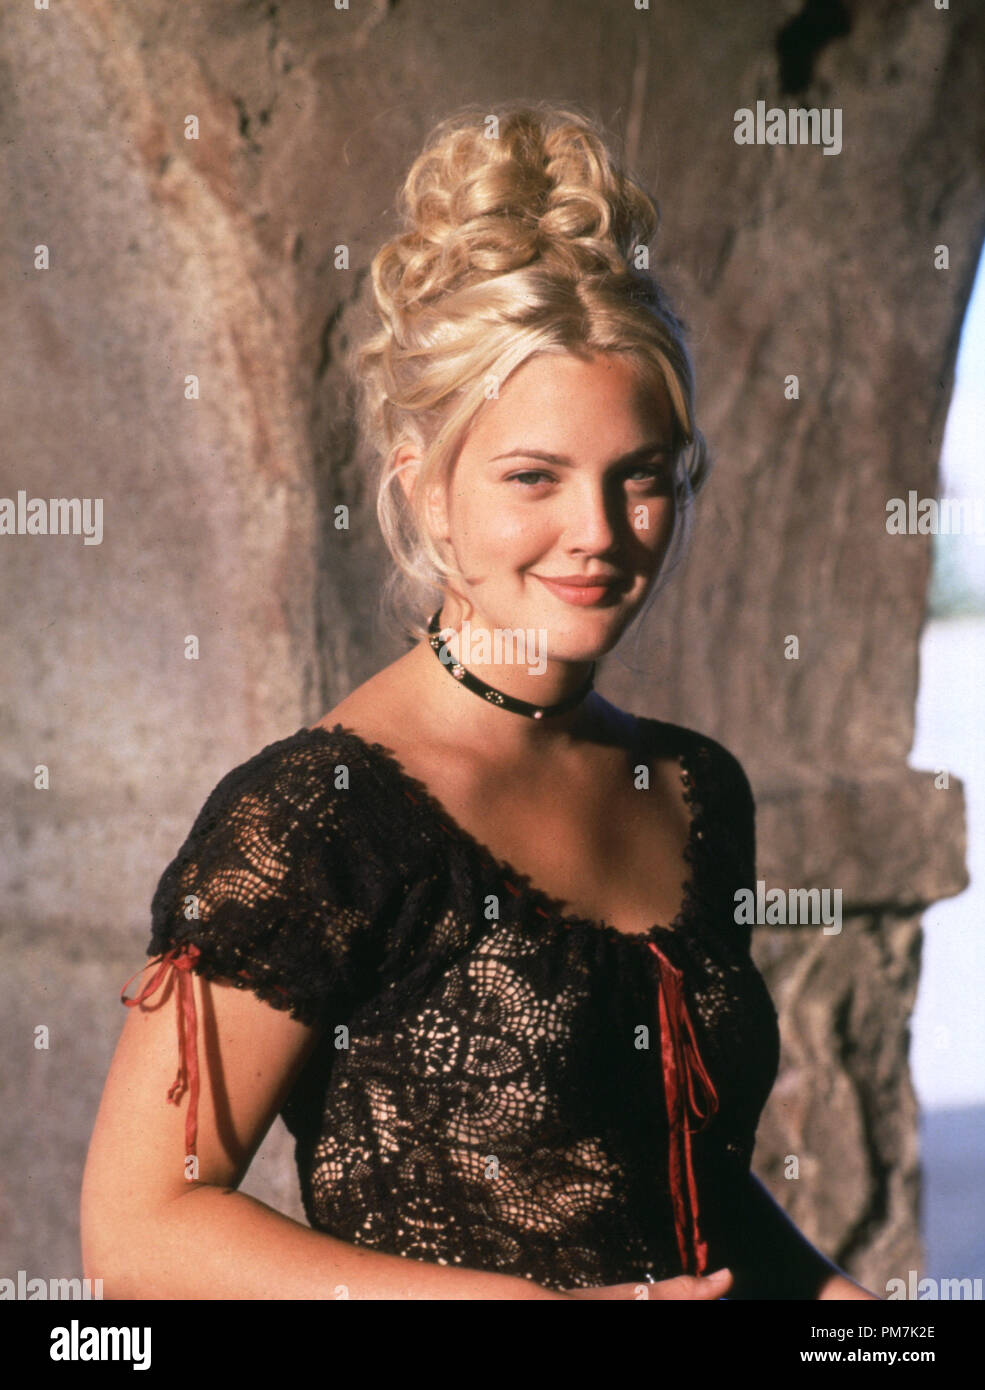 Film Still from 'Bad Girls' Drew Barrymore © 1994 20th Century Fox Photo Credit: Lance Staedler    File Reference # 31129430THA  For Editorial Use Only - All Rights Reserved Stock Photo